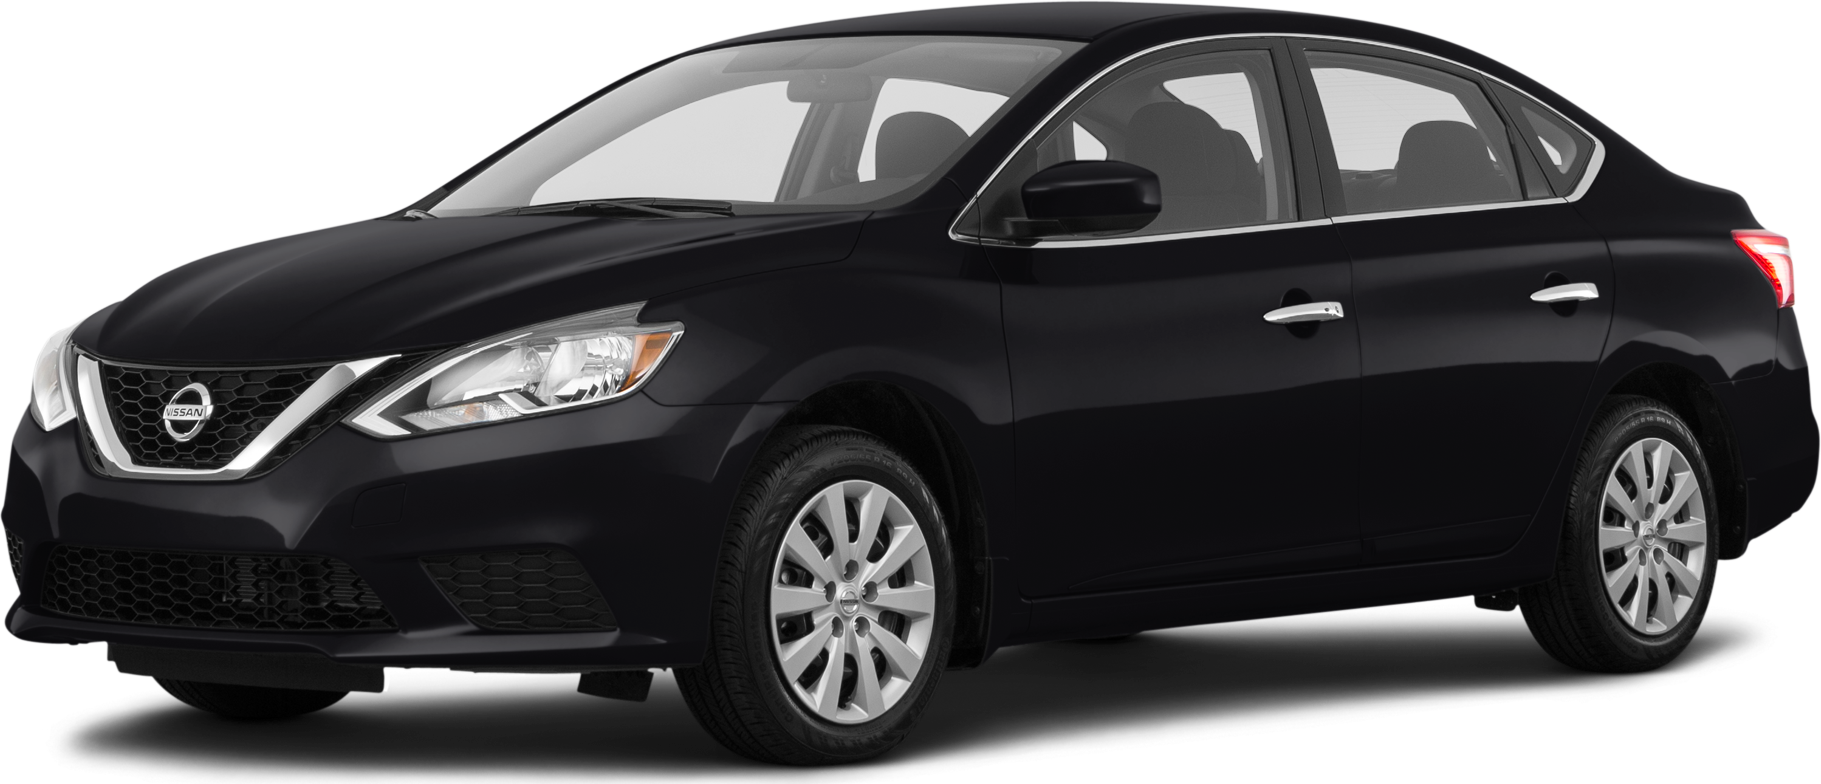 2017 Nissan Sentra Price Value Ratings And Reviews Kelley Blue Book